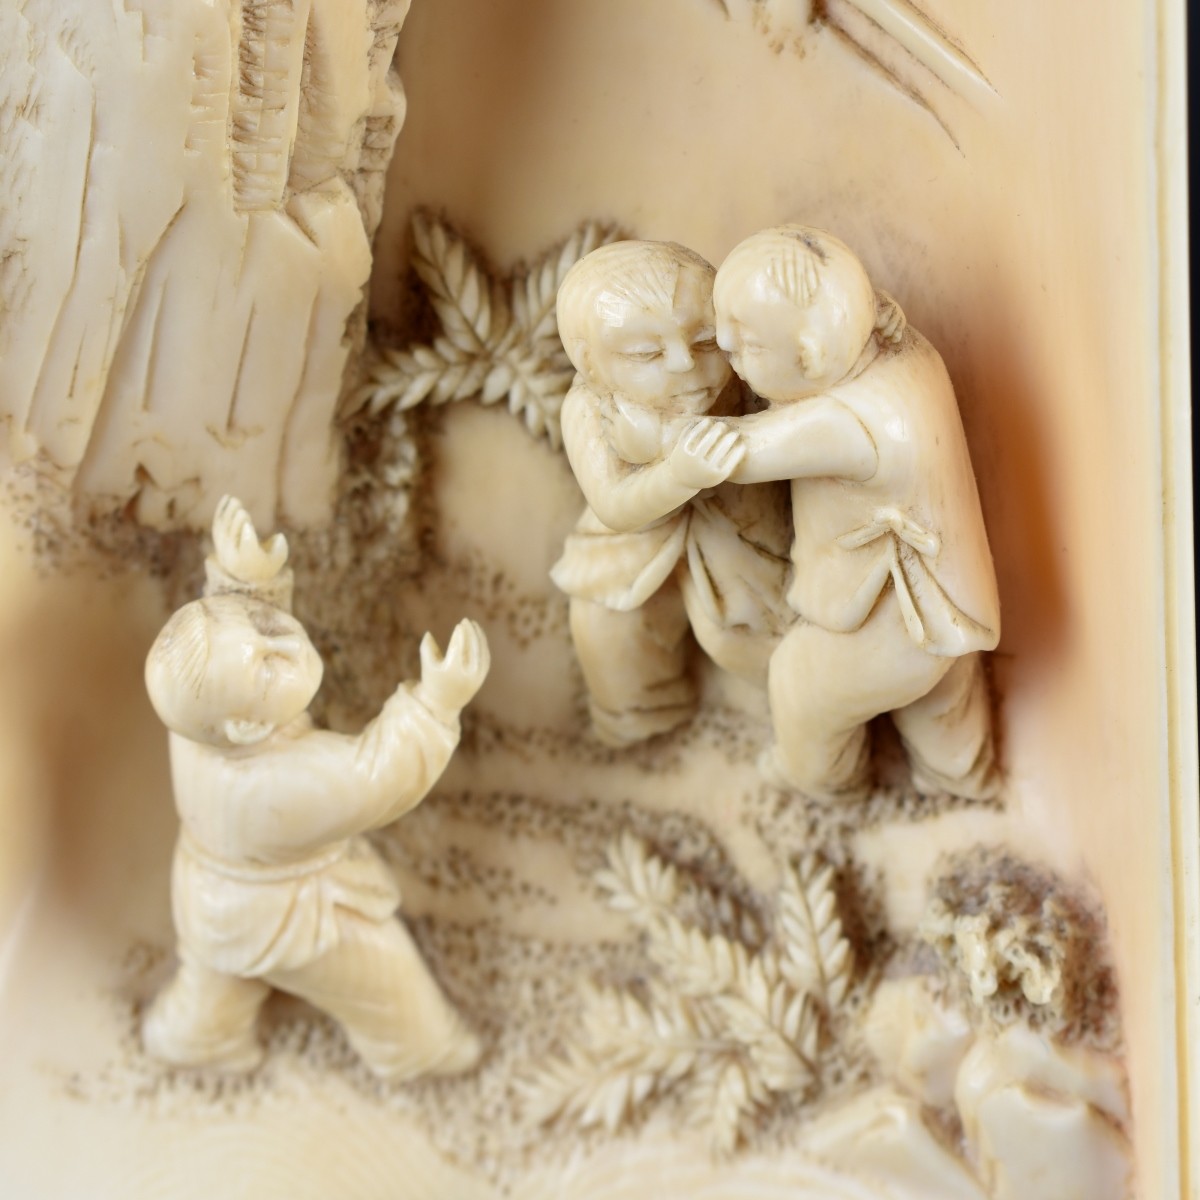 Chinese Ivory Carvings